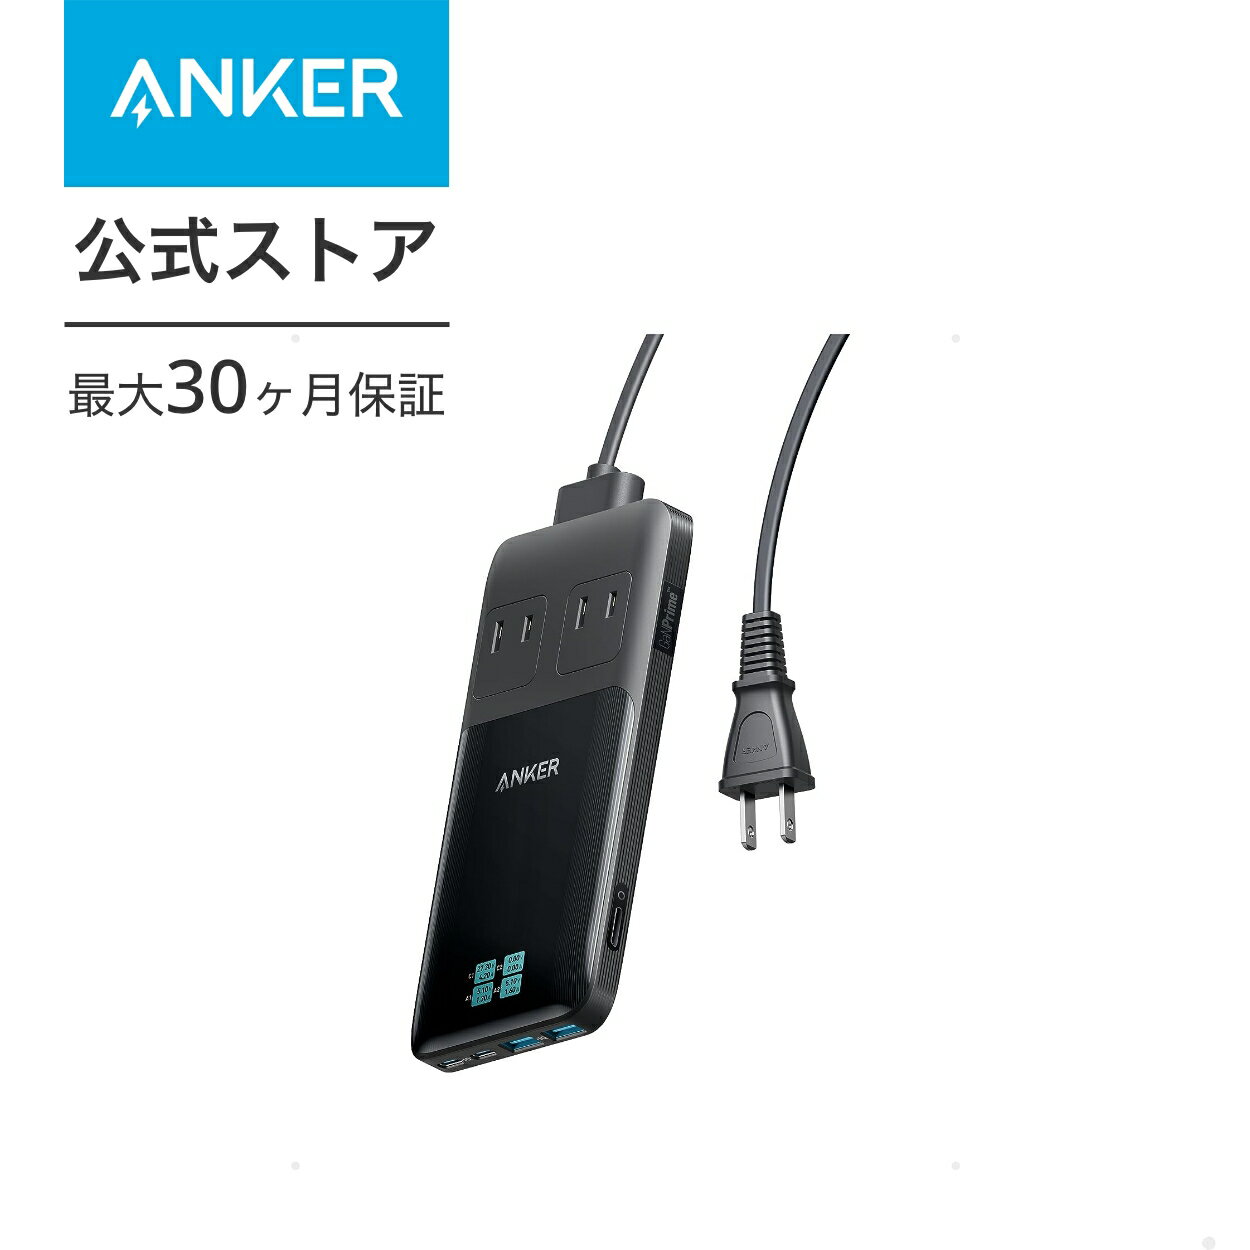 Anker Prime Charging Station (6-in-1, 140W) 6-in